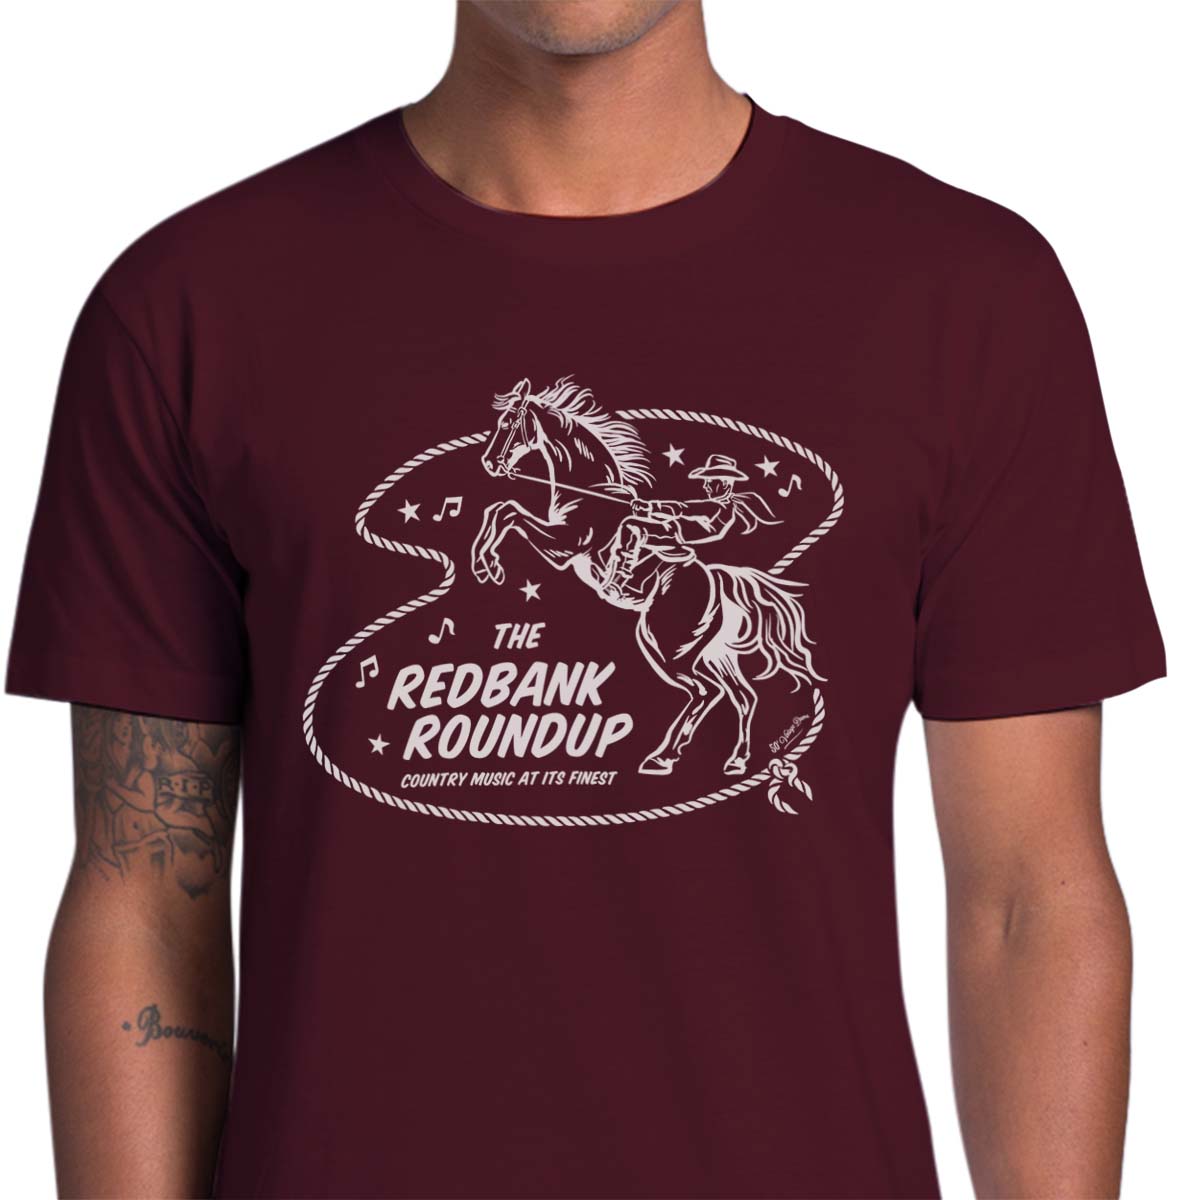 Burgundy unisex t-shirt with a cowboy riding a bucking bronco. Text says "The Red Bank Roundup - country music at its finest" A lasso, stars and music notes surround the design.